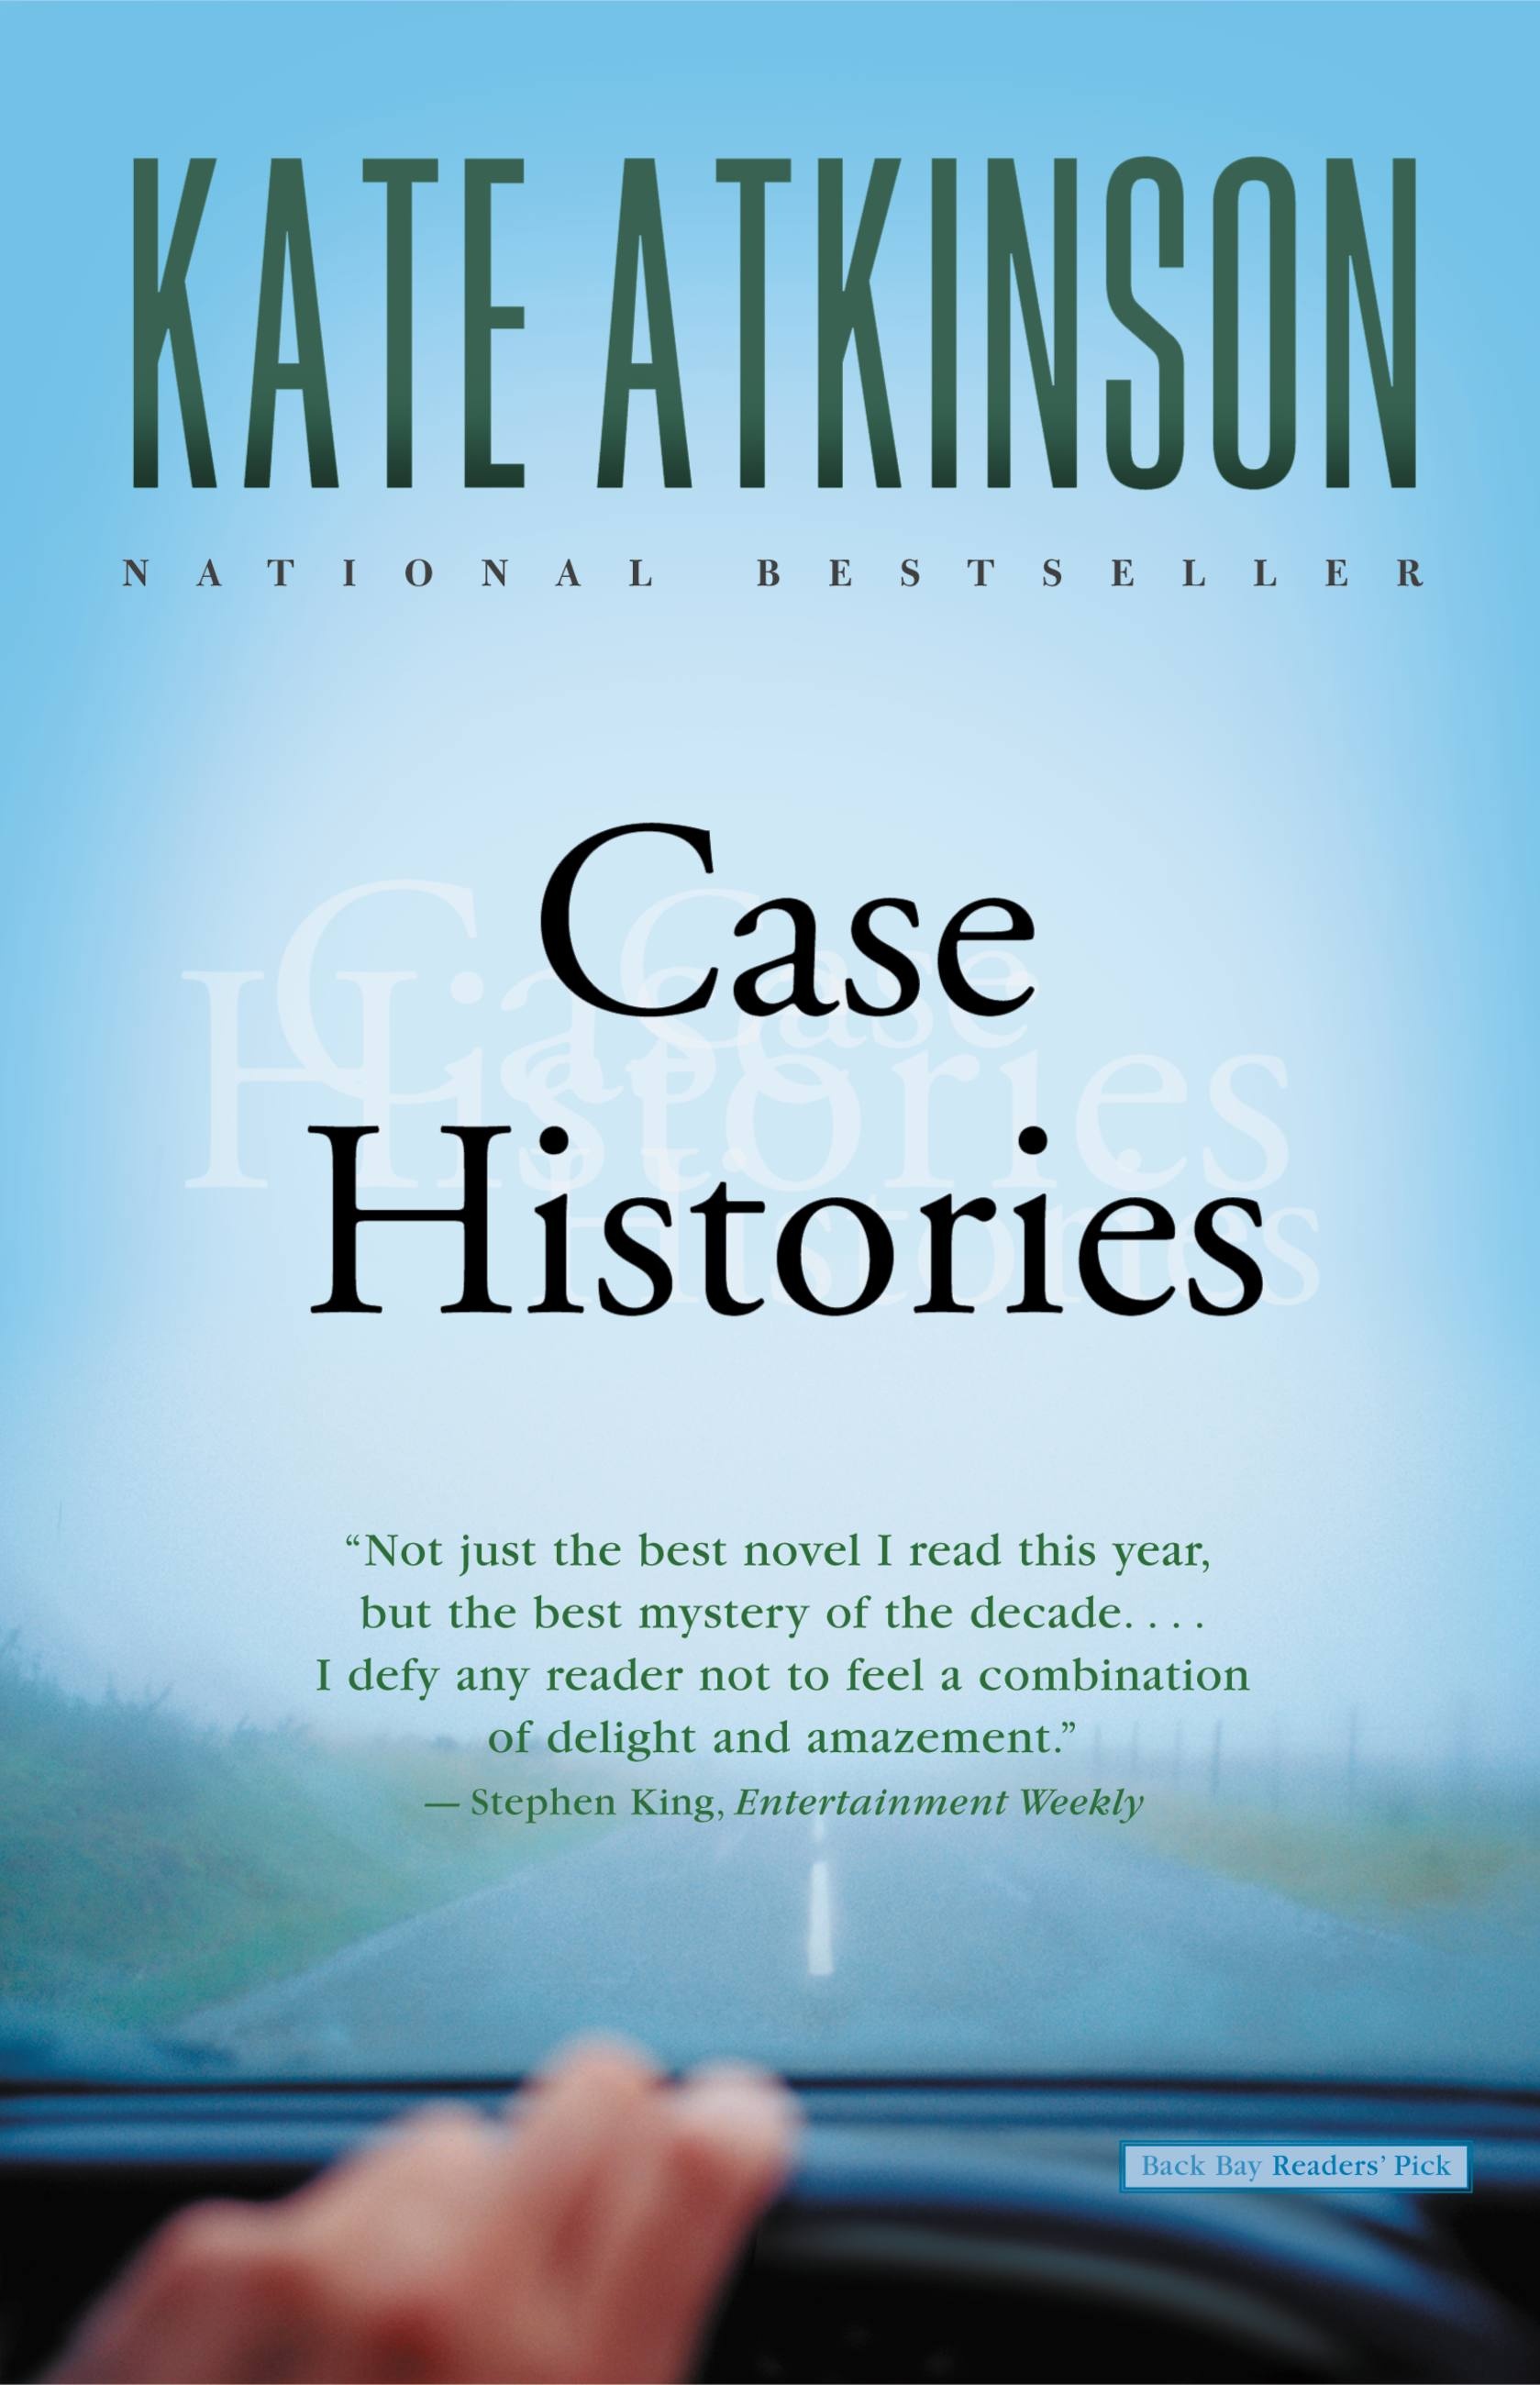 book review case histories kate atkinson